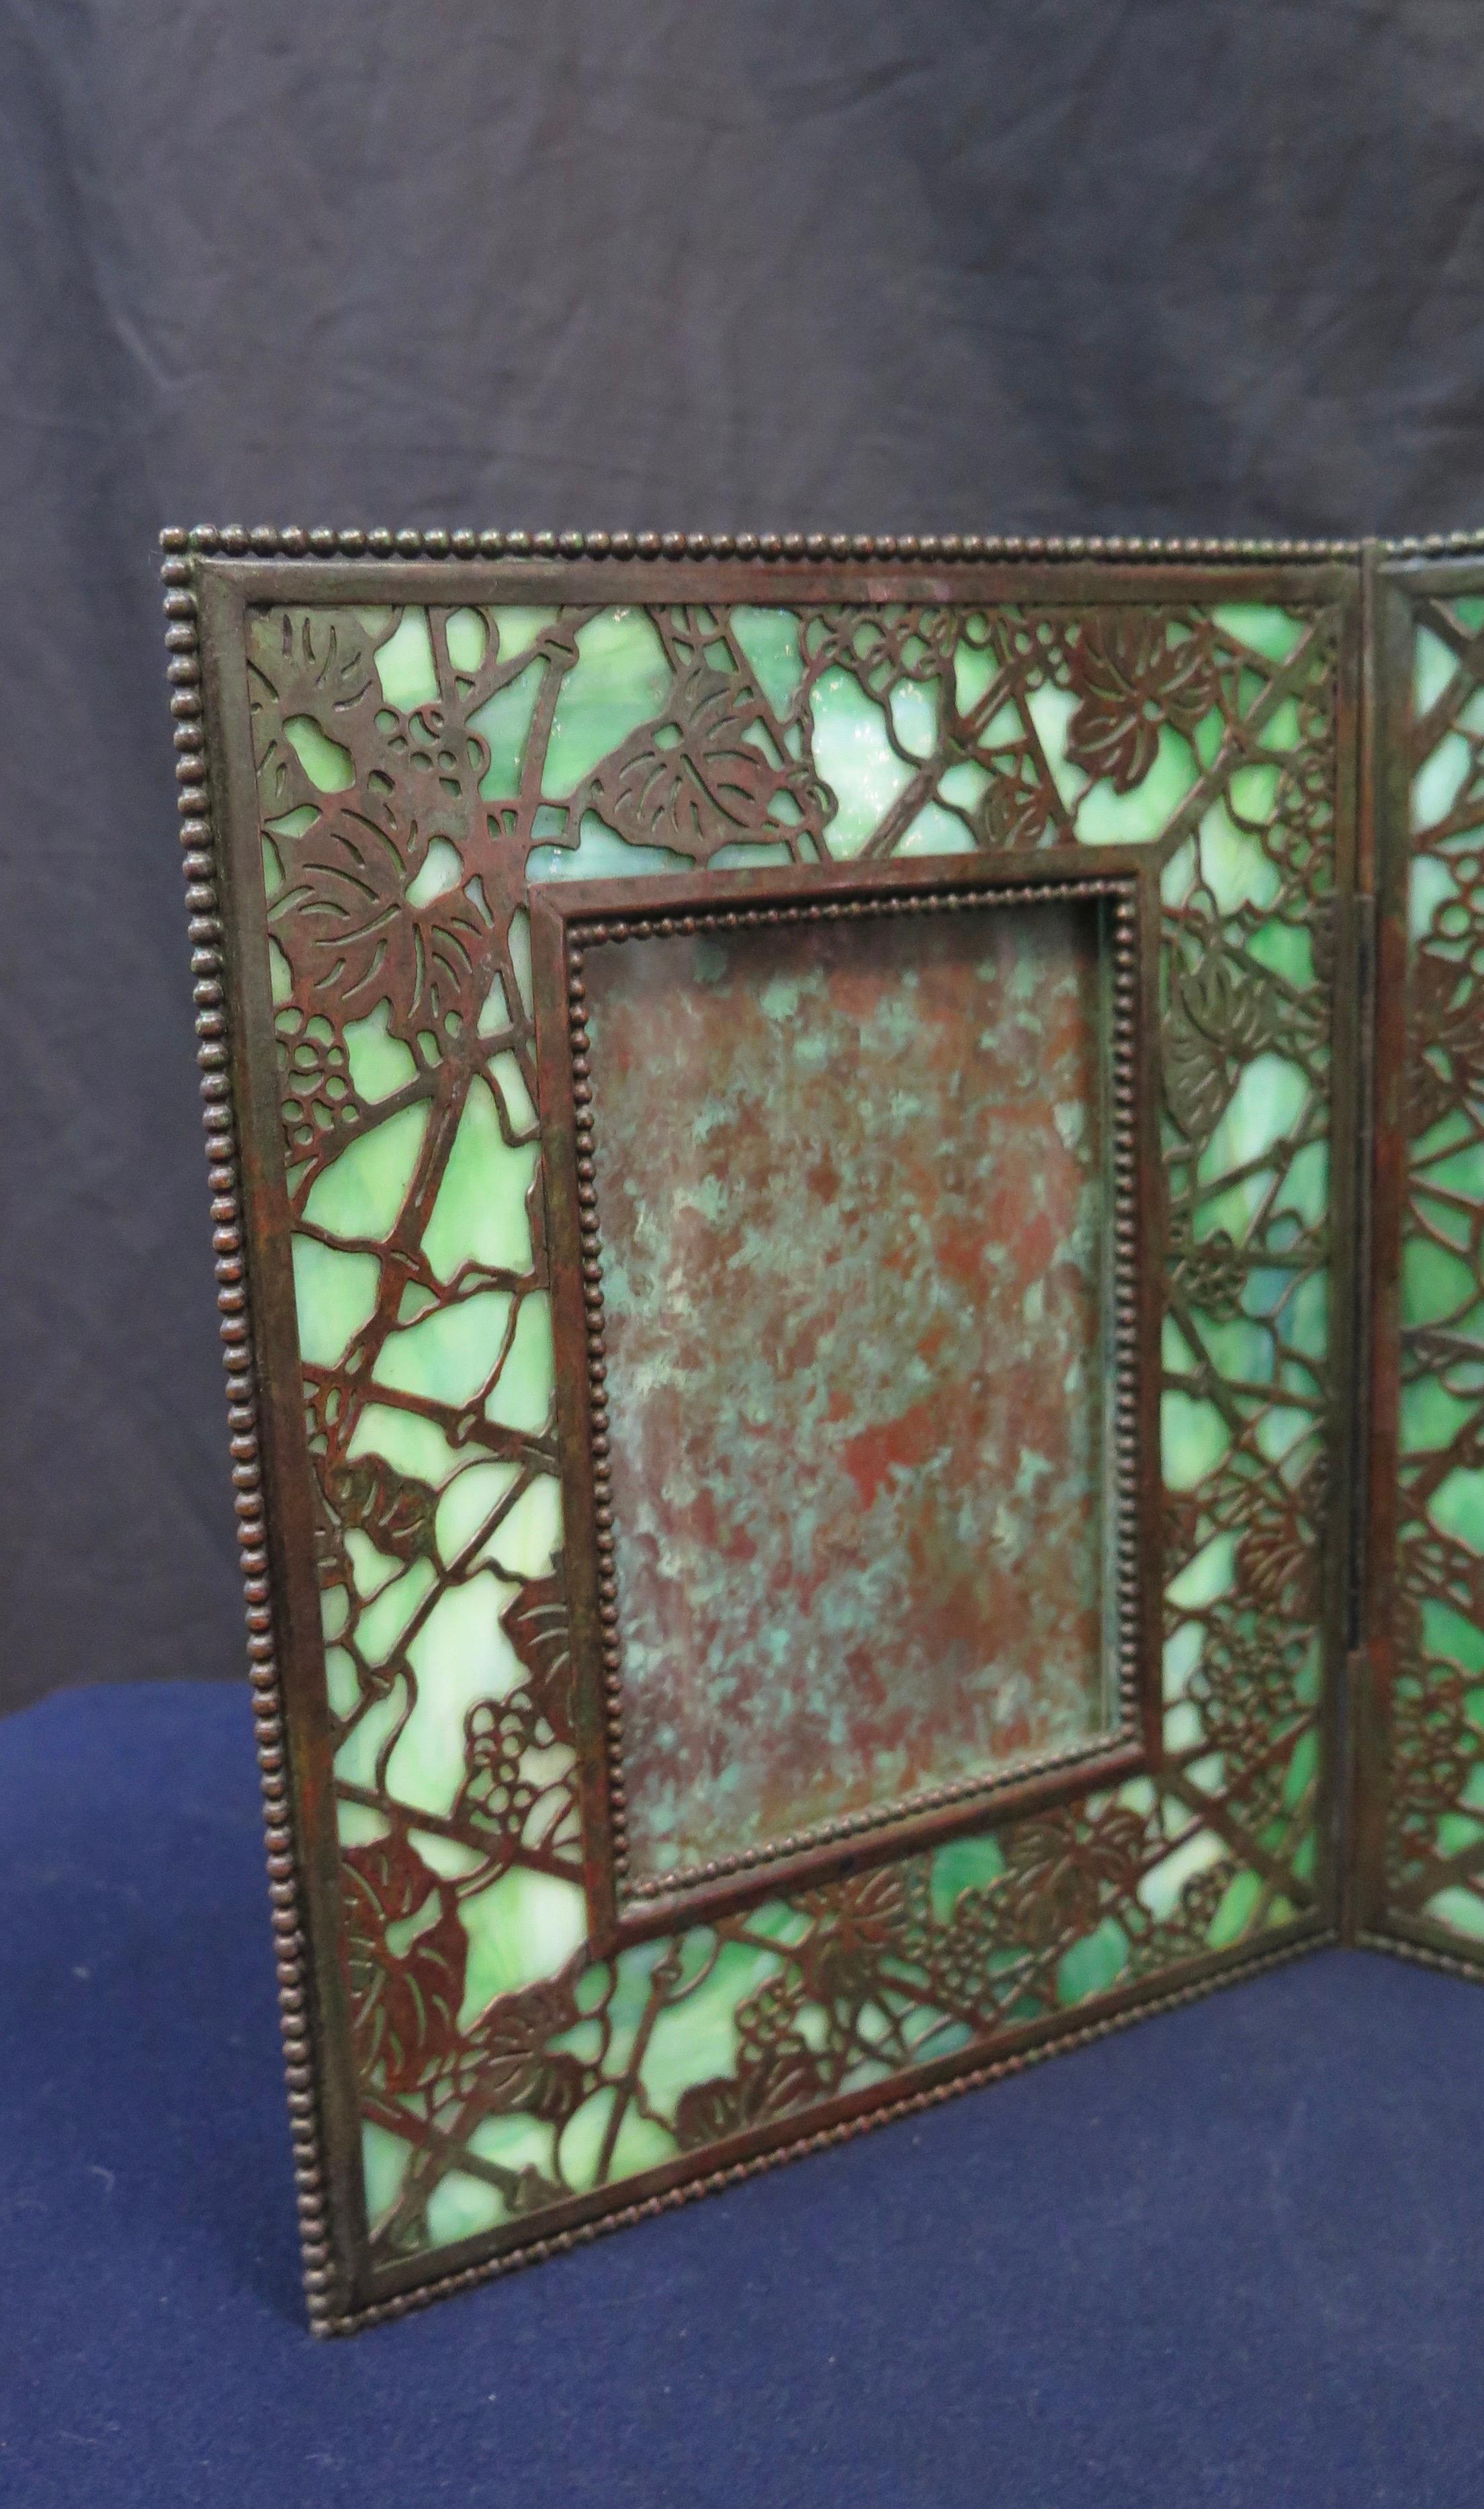 This beautifully preserved vintage Tiffany Studios side by side double bronze and glass photo frame is designed in the grapevine motif and dates from the early 20th century. Patinated bronze grapevine pattern is showcased overlaying green favrile